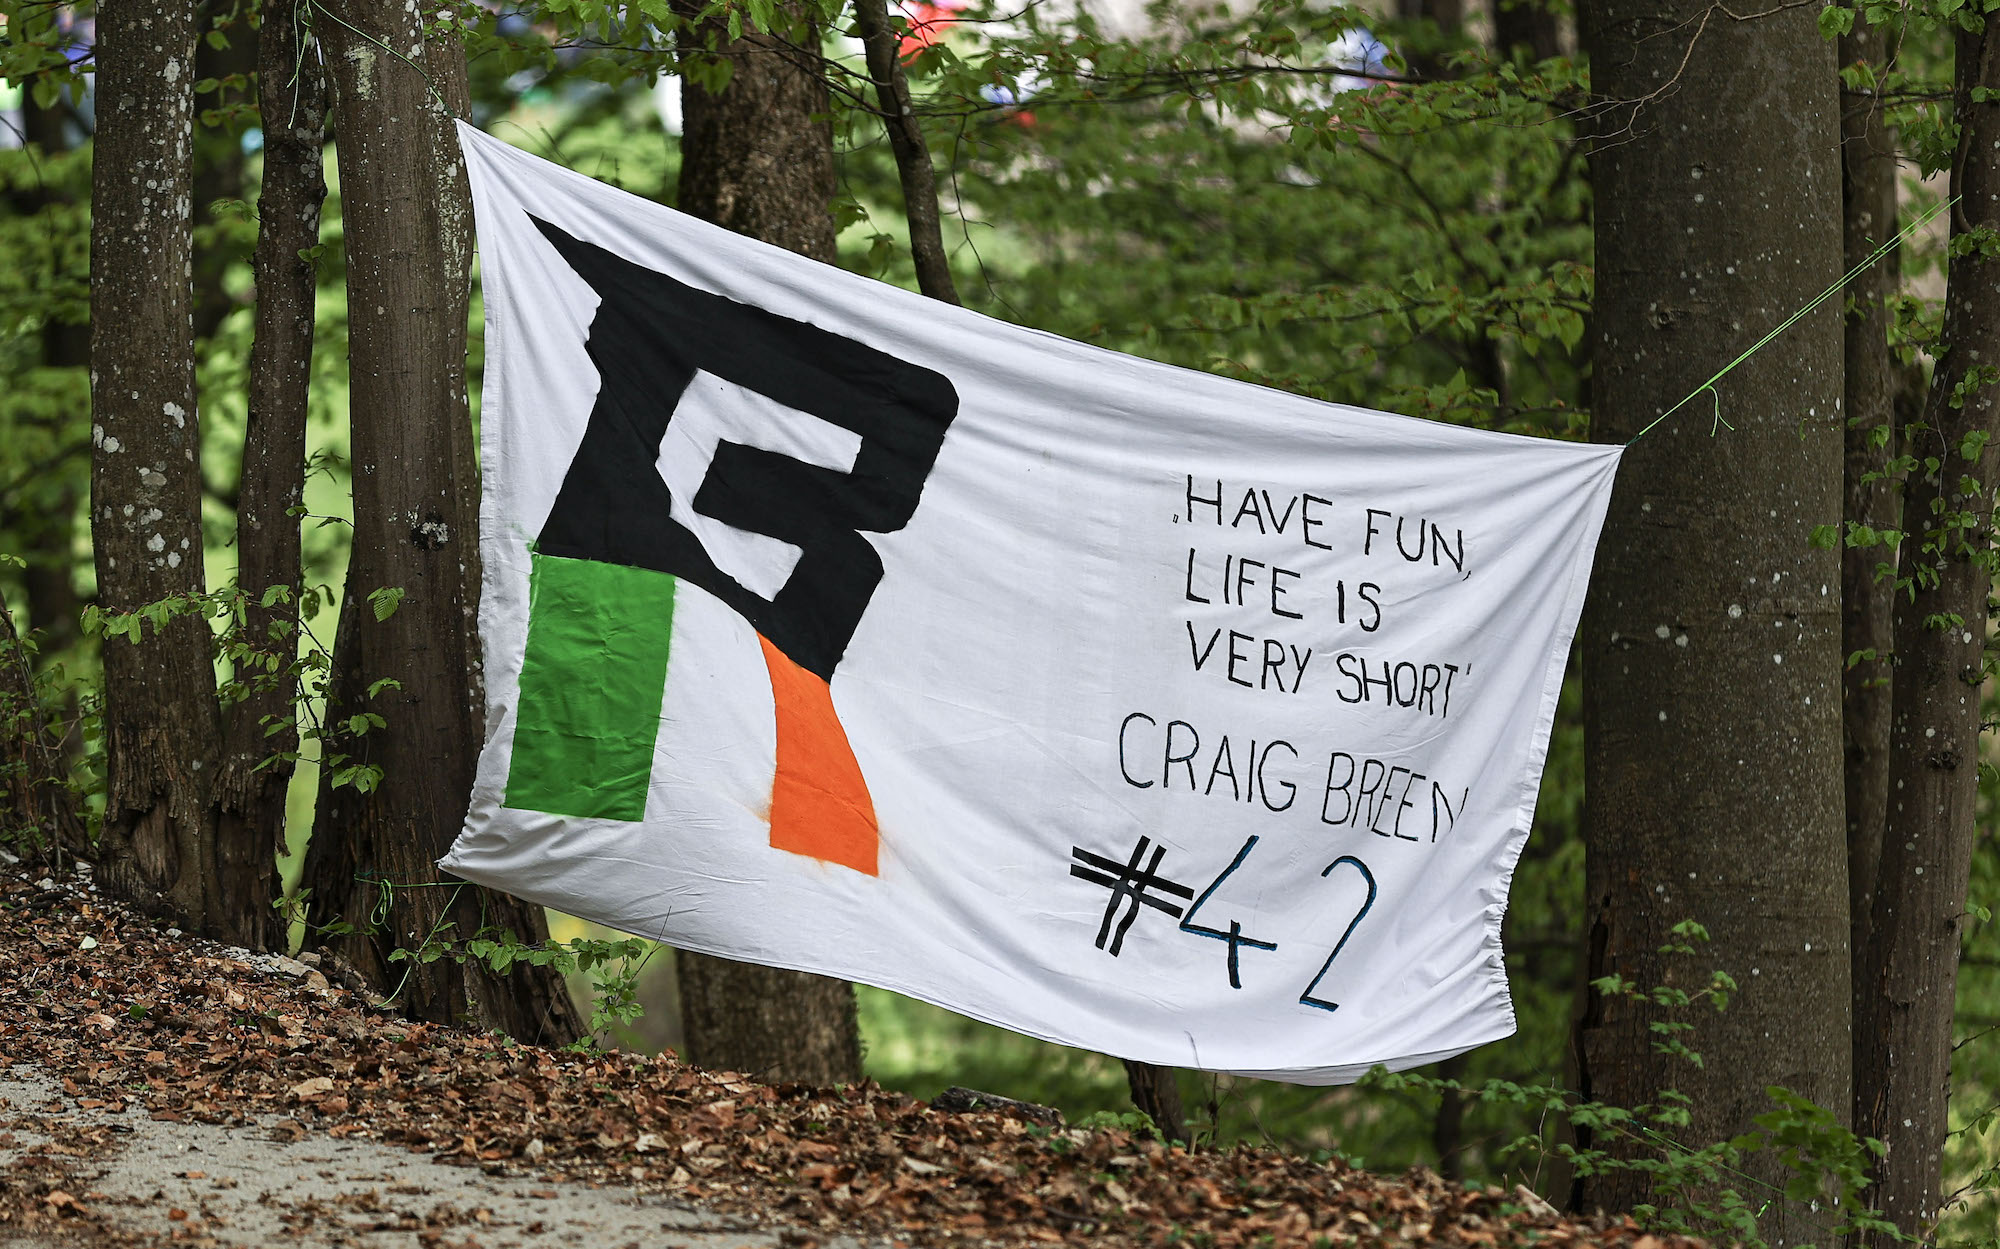 ZAGREB, CROATIA - MARCH 20: A sign in tribute to Craig Breen of Ireland and Hyundai Shell Mobis World Rally Team who succumbed to injuries sustained in a testing crash last week during Day One of the FIA World Rally Championship Croatia on March 20, 2023 in Zagreb, Croatia. (Photo by Qian Jun/MB Media/Getty Images)